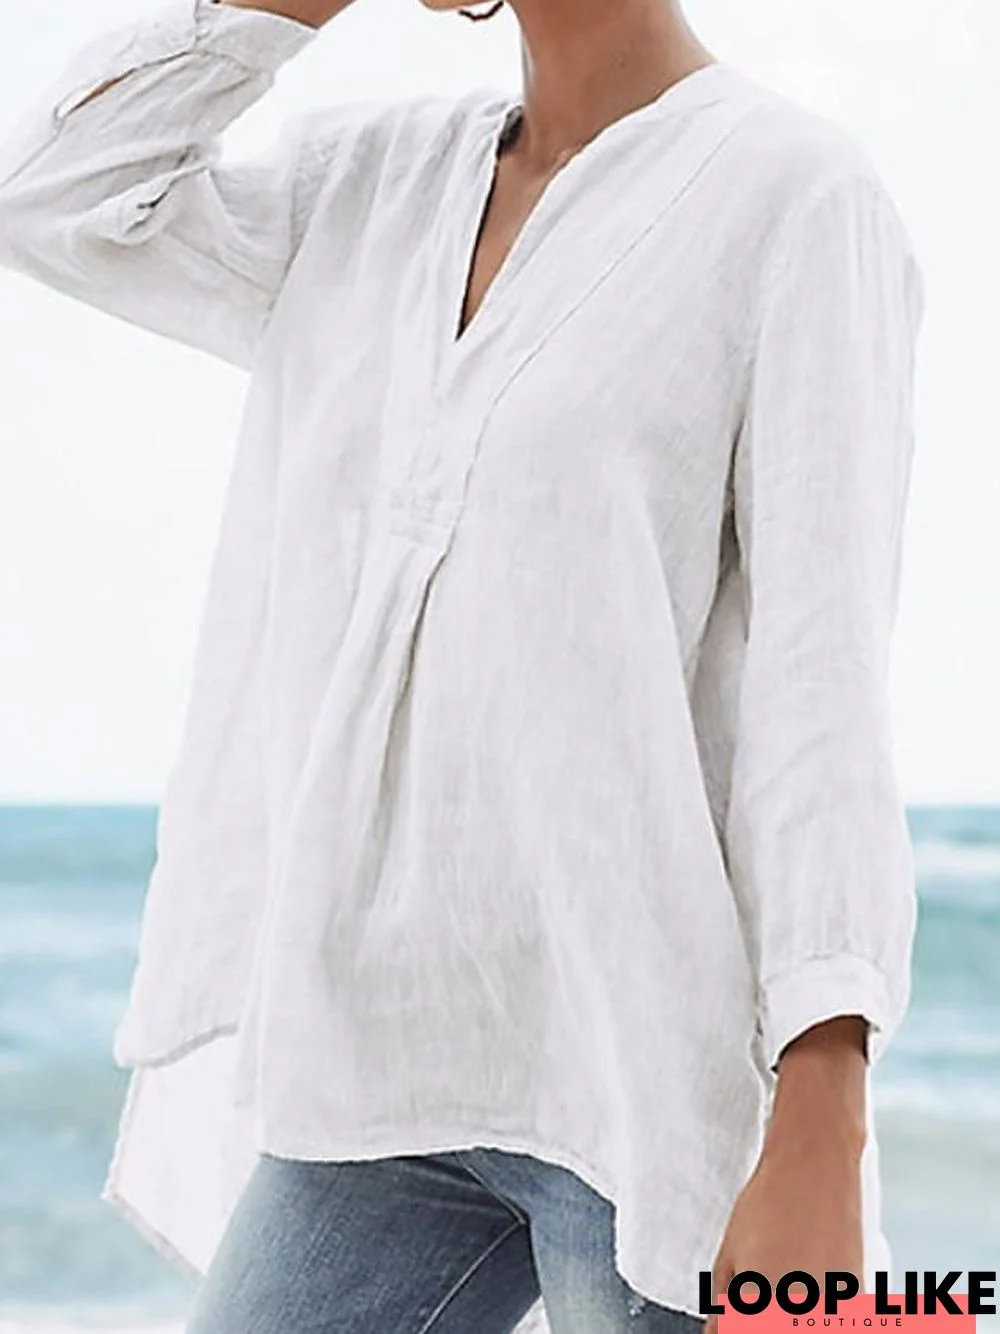 Women's Blouse Shirt Solid Colored Long Sleeve Asymmetric V Neck Tops Loose Cotton Basic Top White Black Yellow-0207808 Linen